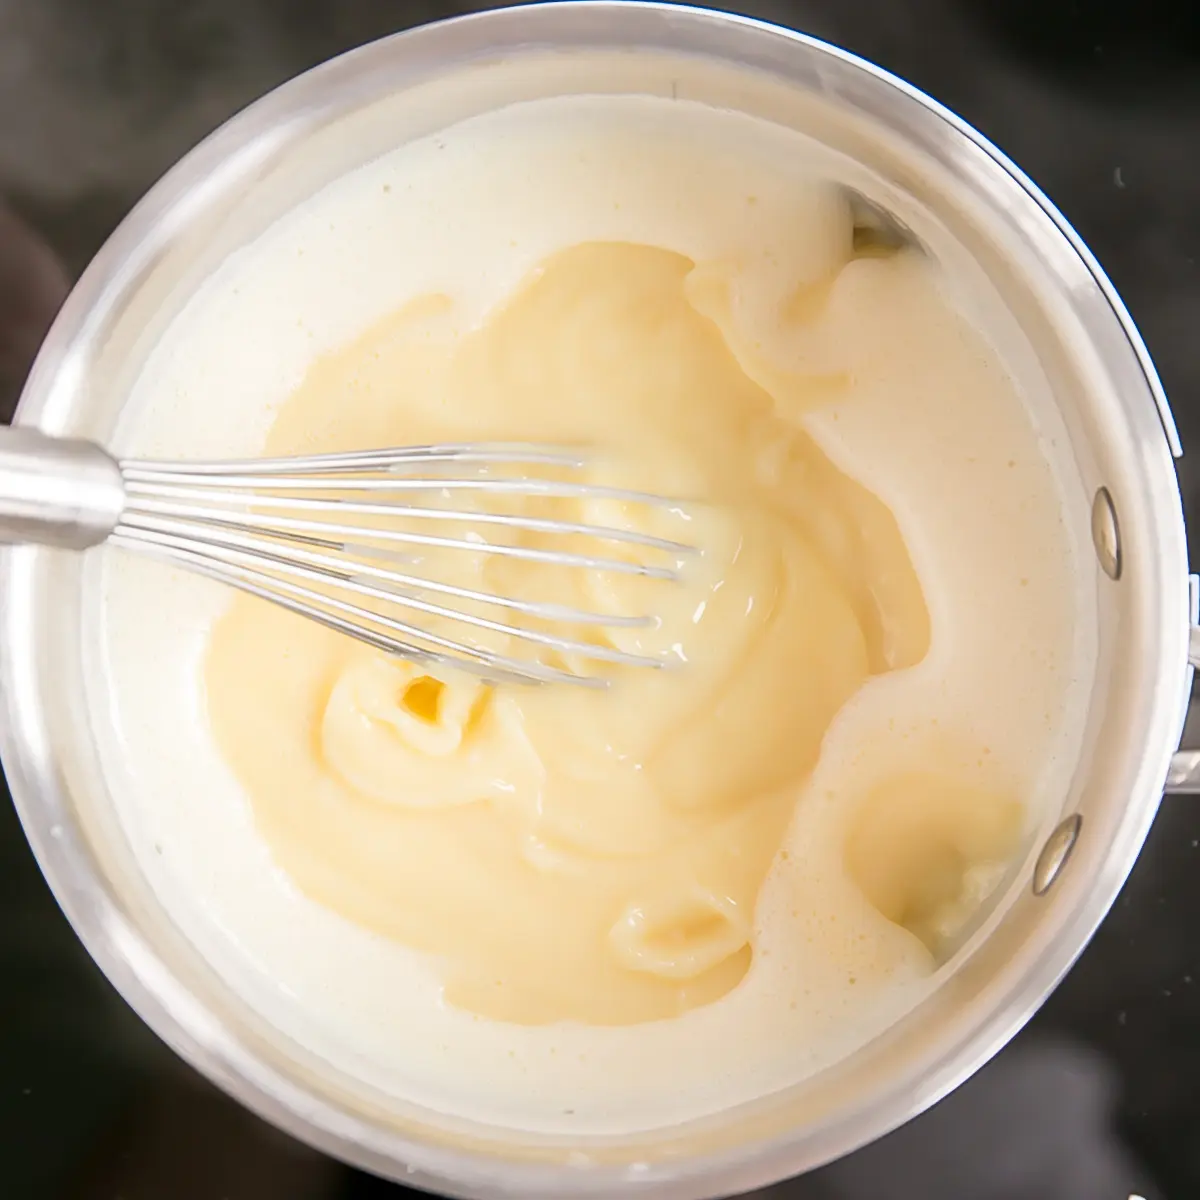 Pastry cream brought to a boil.